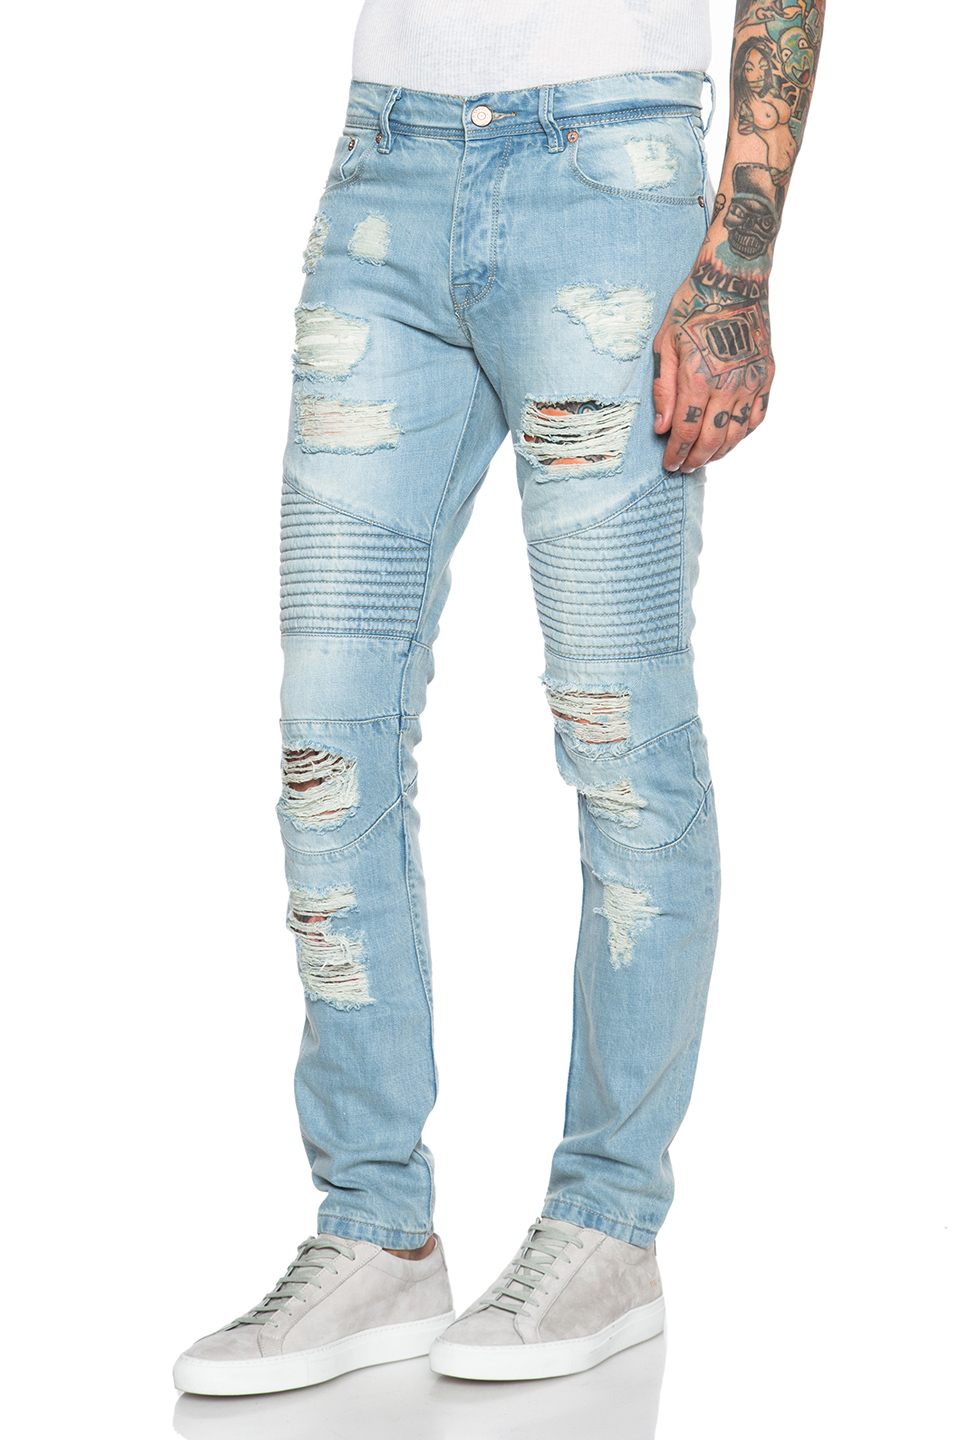 Lyst - Stampd Distressed Moto Jeans in Blue